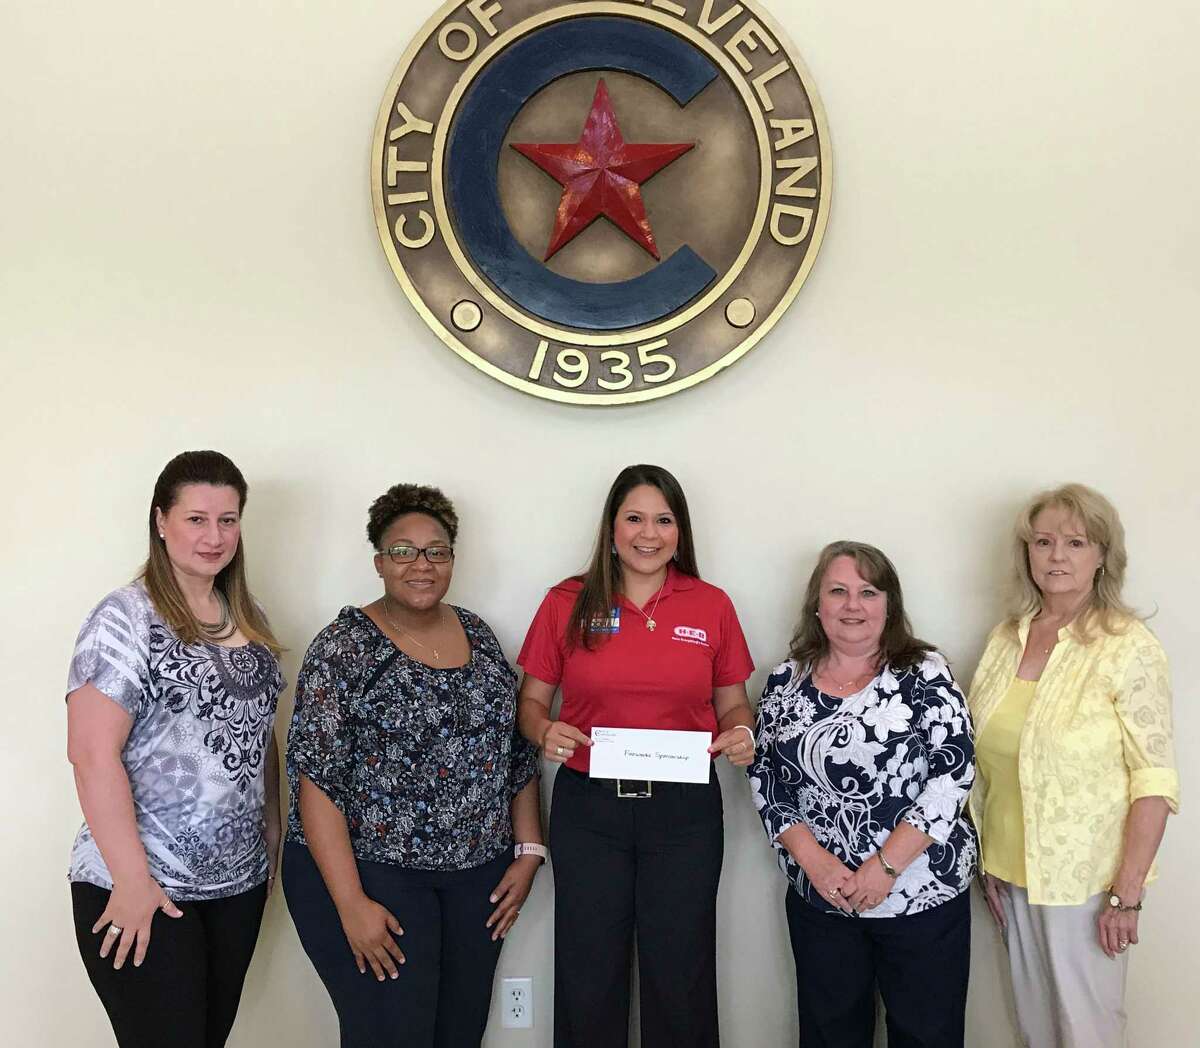 Dora Gallegos, manager of the H-E-B store in Cleveland, presents a donation to City of Cleveland staff for sponsorship of the Fourth of July Fireworks Show. H-E-B agreed to be a Star-Spangled sponsor, one of two, for the event. Pictured with Gallegos (center) is Civic Center staff Marina Ybanez and Ashleigh Broussard, City Manager Kelly McDonald and Mayor Pro Tem Carolyn McWaters.